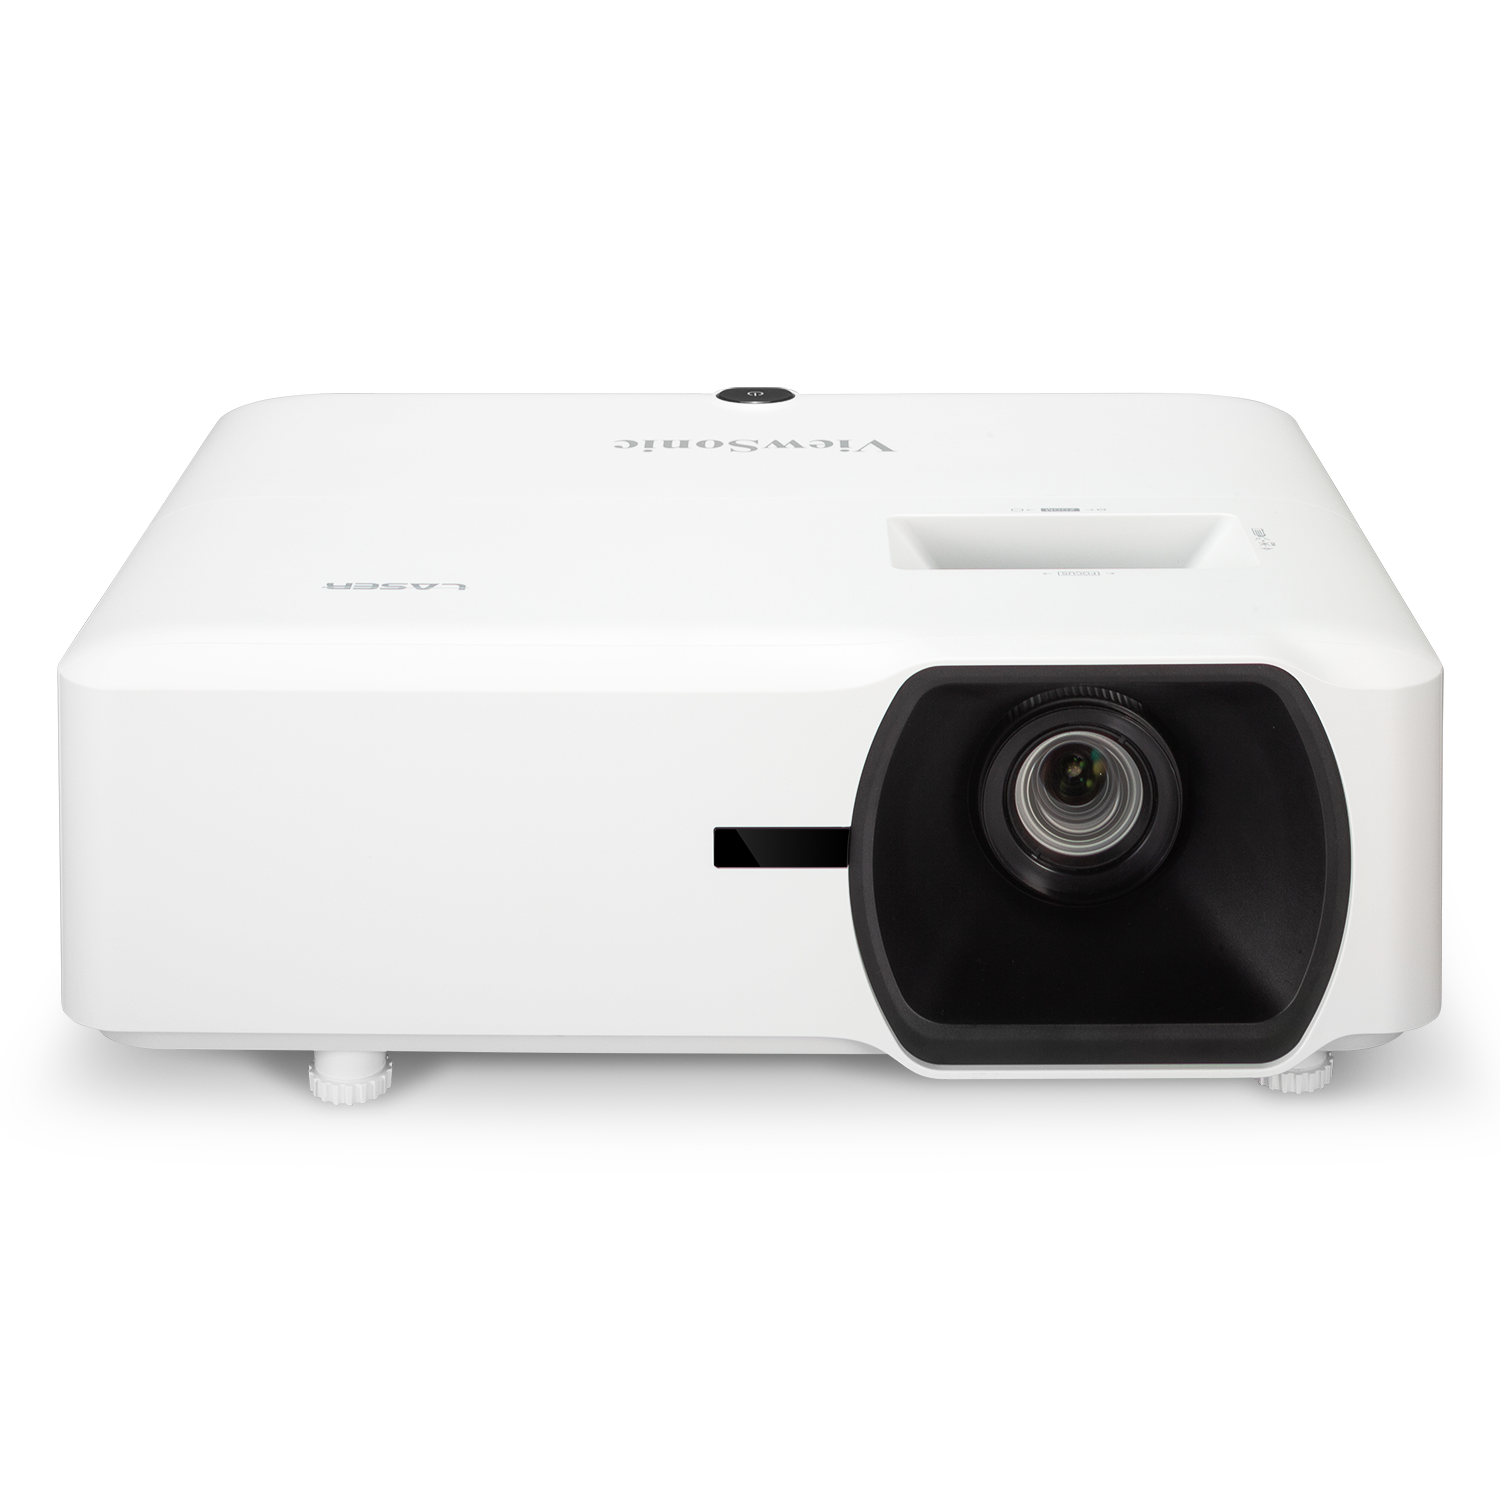 ViewSonic LS750WU 5000 Lumens WUXGA Networkable Laser Projector with 1.3x Optical Zoom Vertical Horizontal Keystone and Lens Shift for Large Venues - image 2 of 6